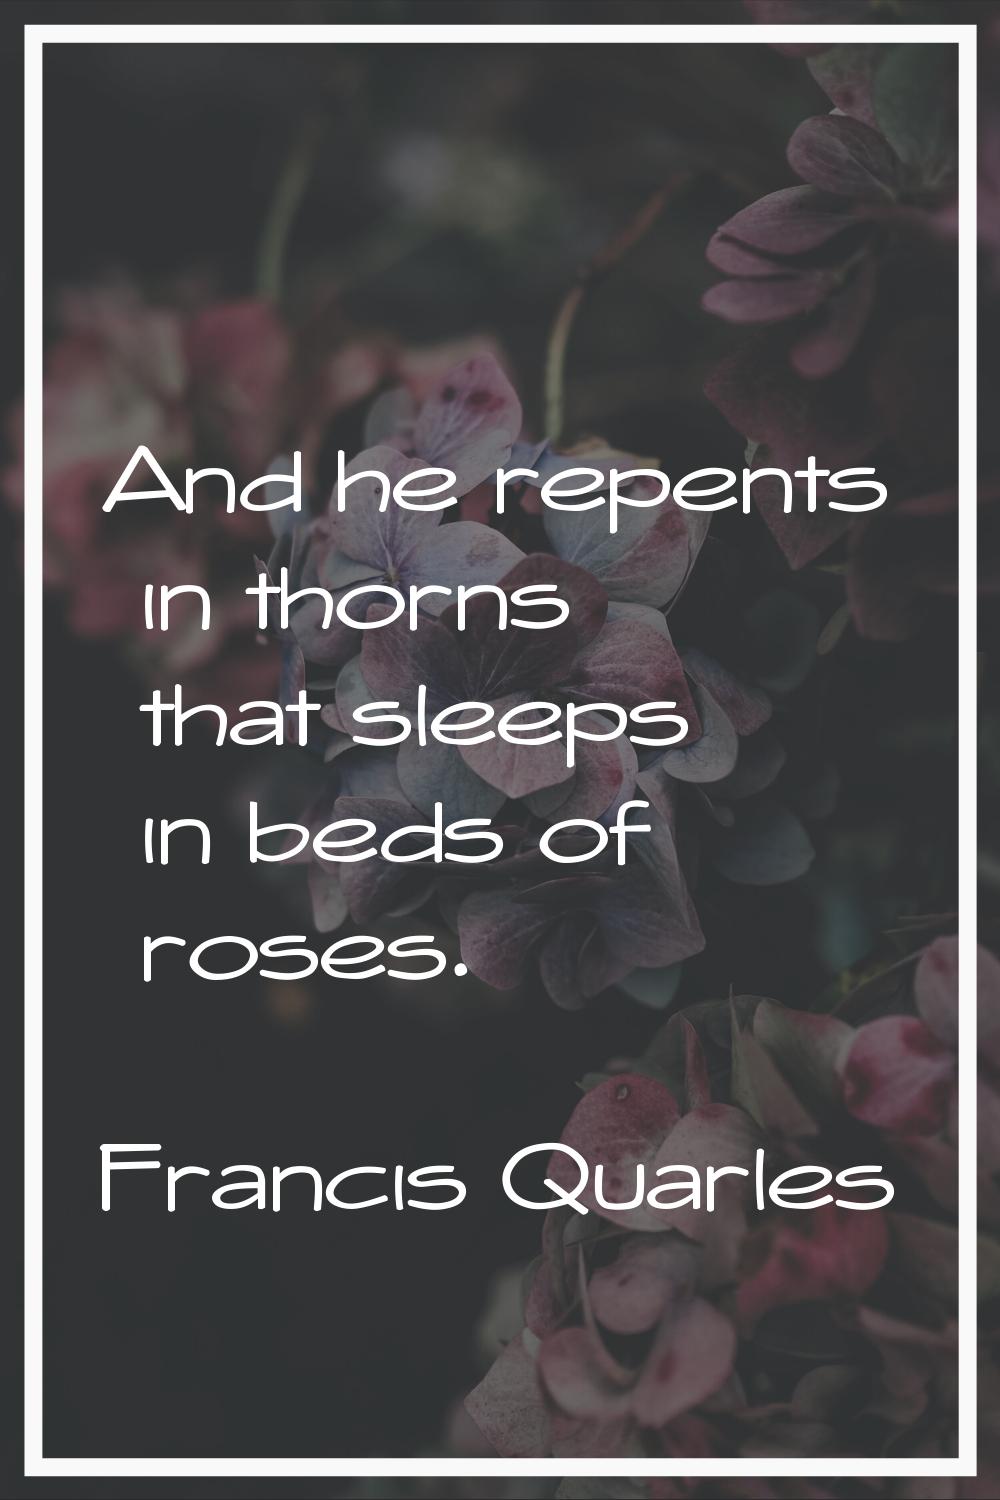 And he repents in thorns that sleeps in beds of roses.